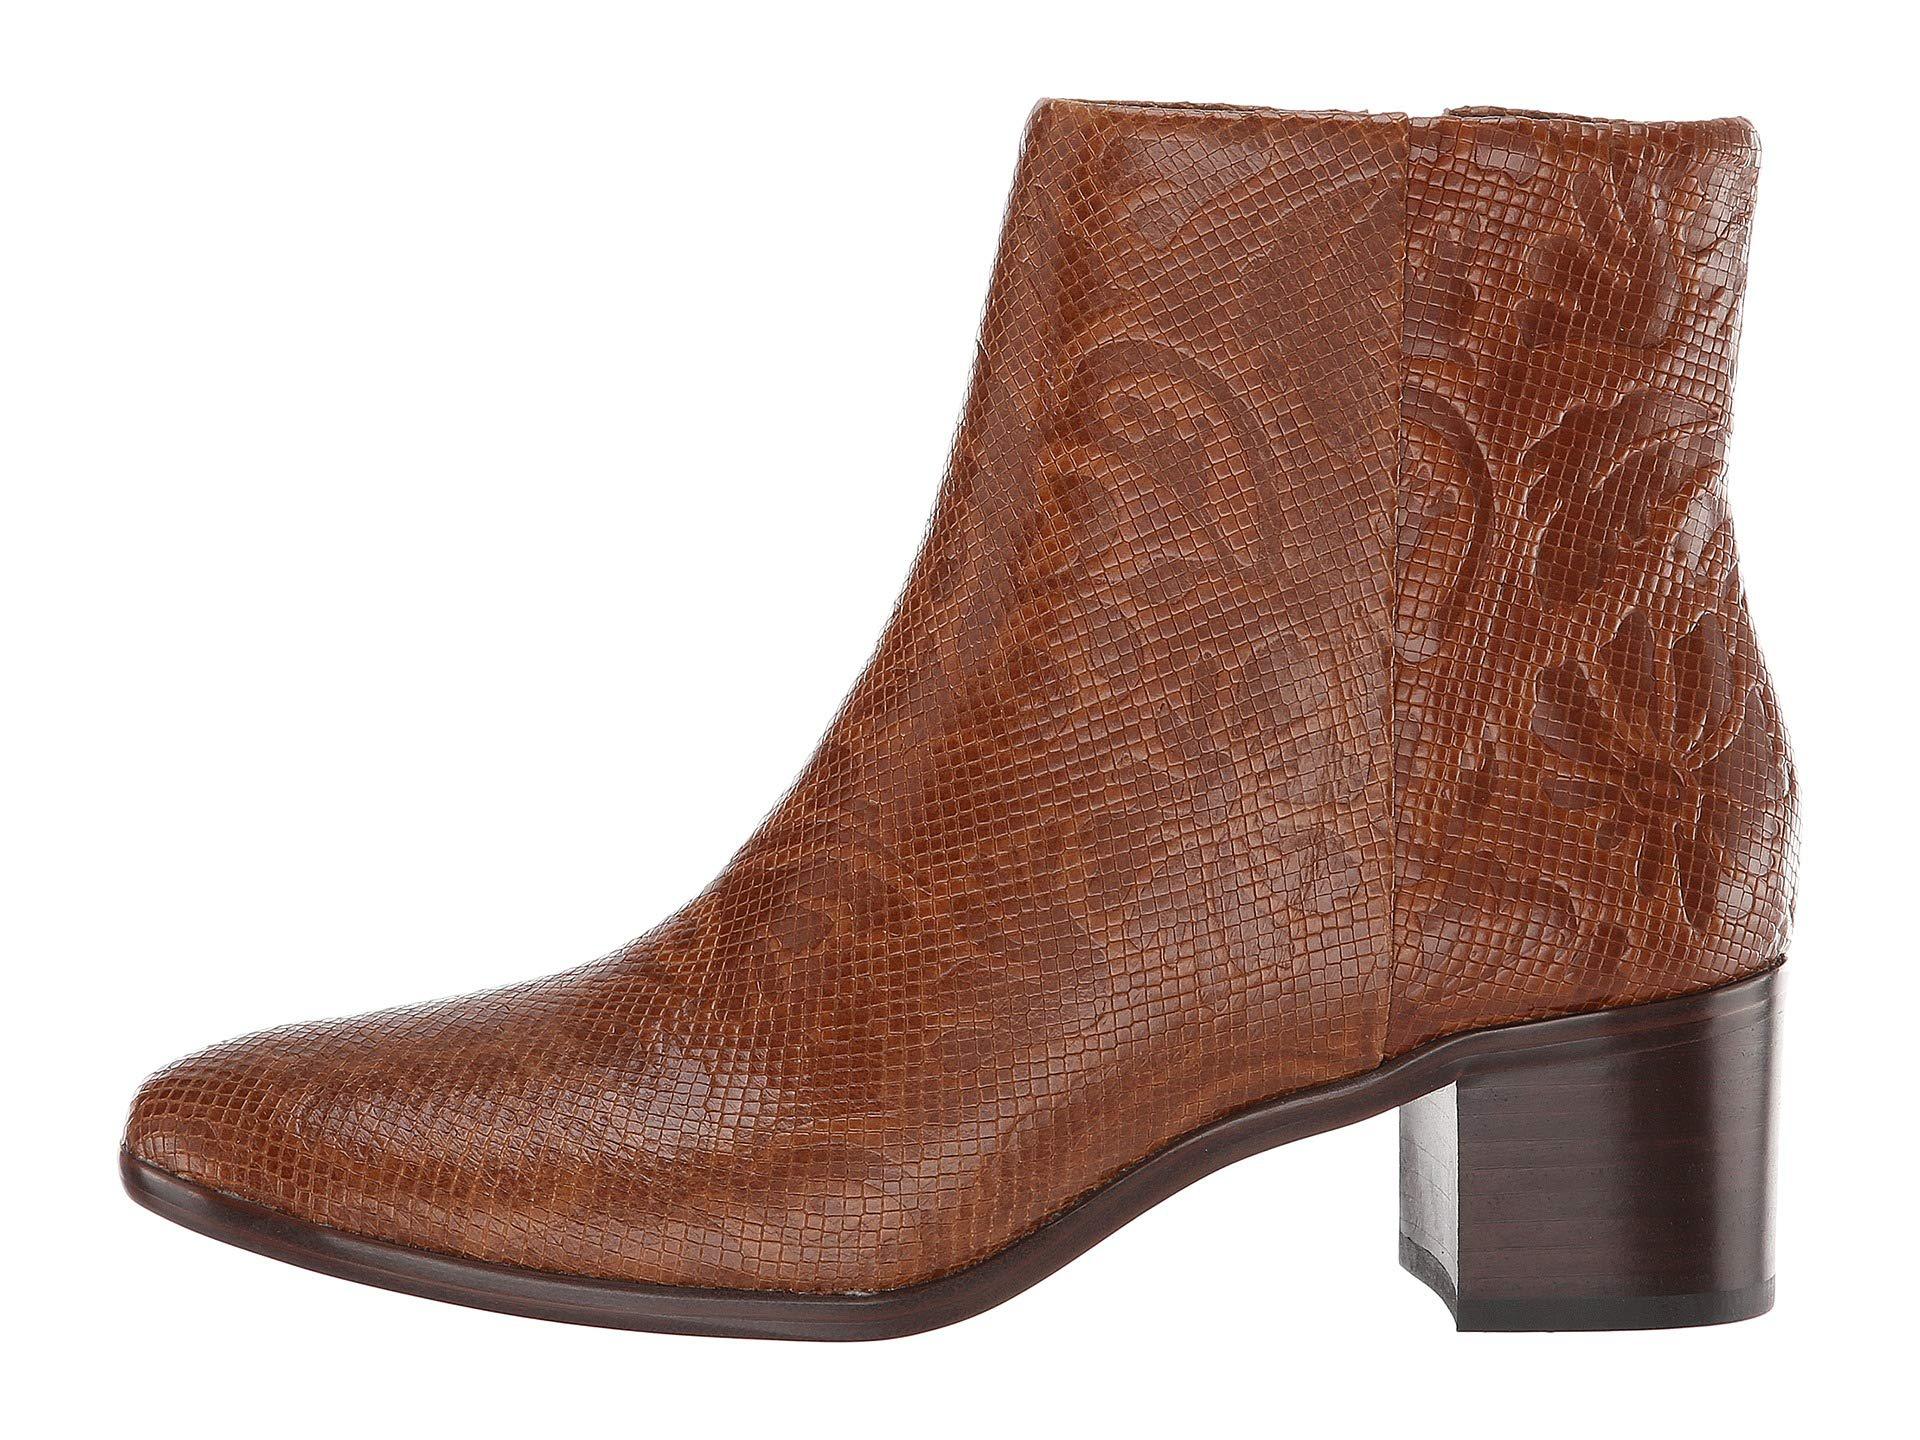 Patricia Nash Leather Marcella (cognac Tooled Snake) Shoes